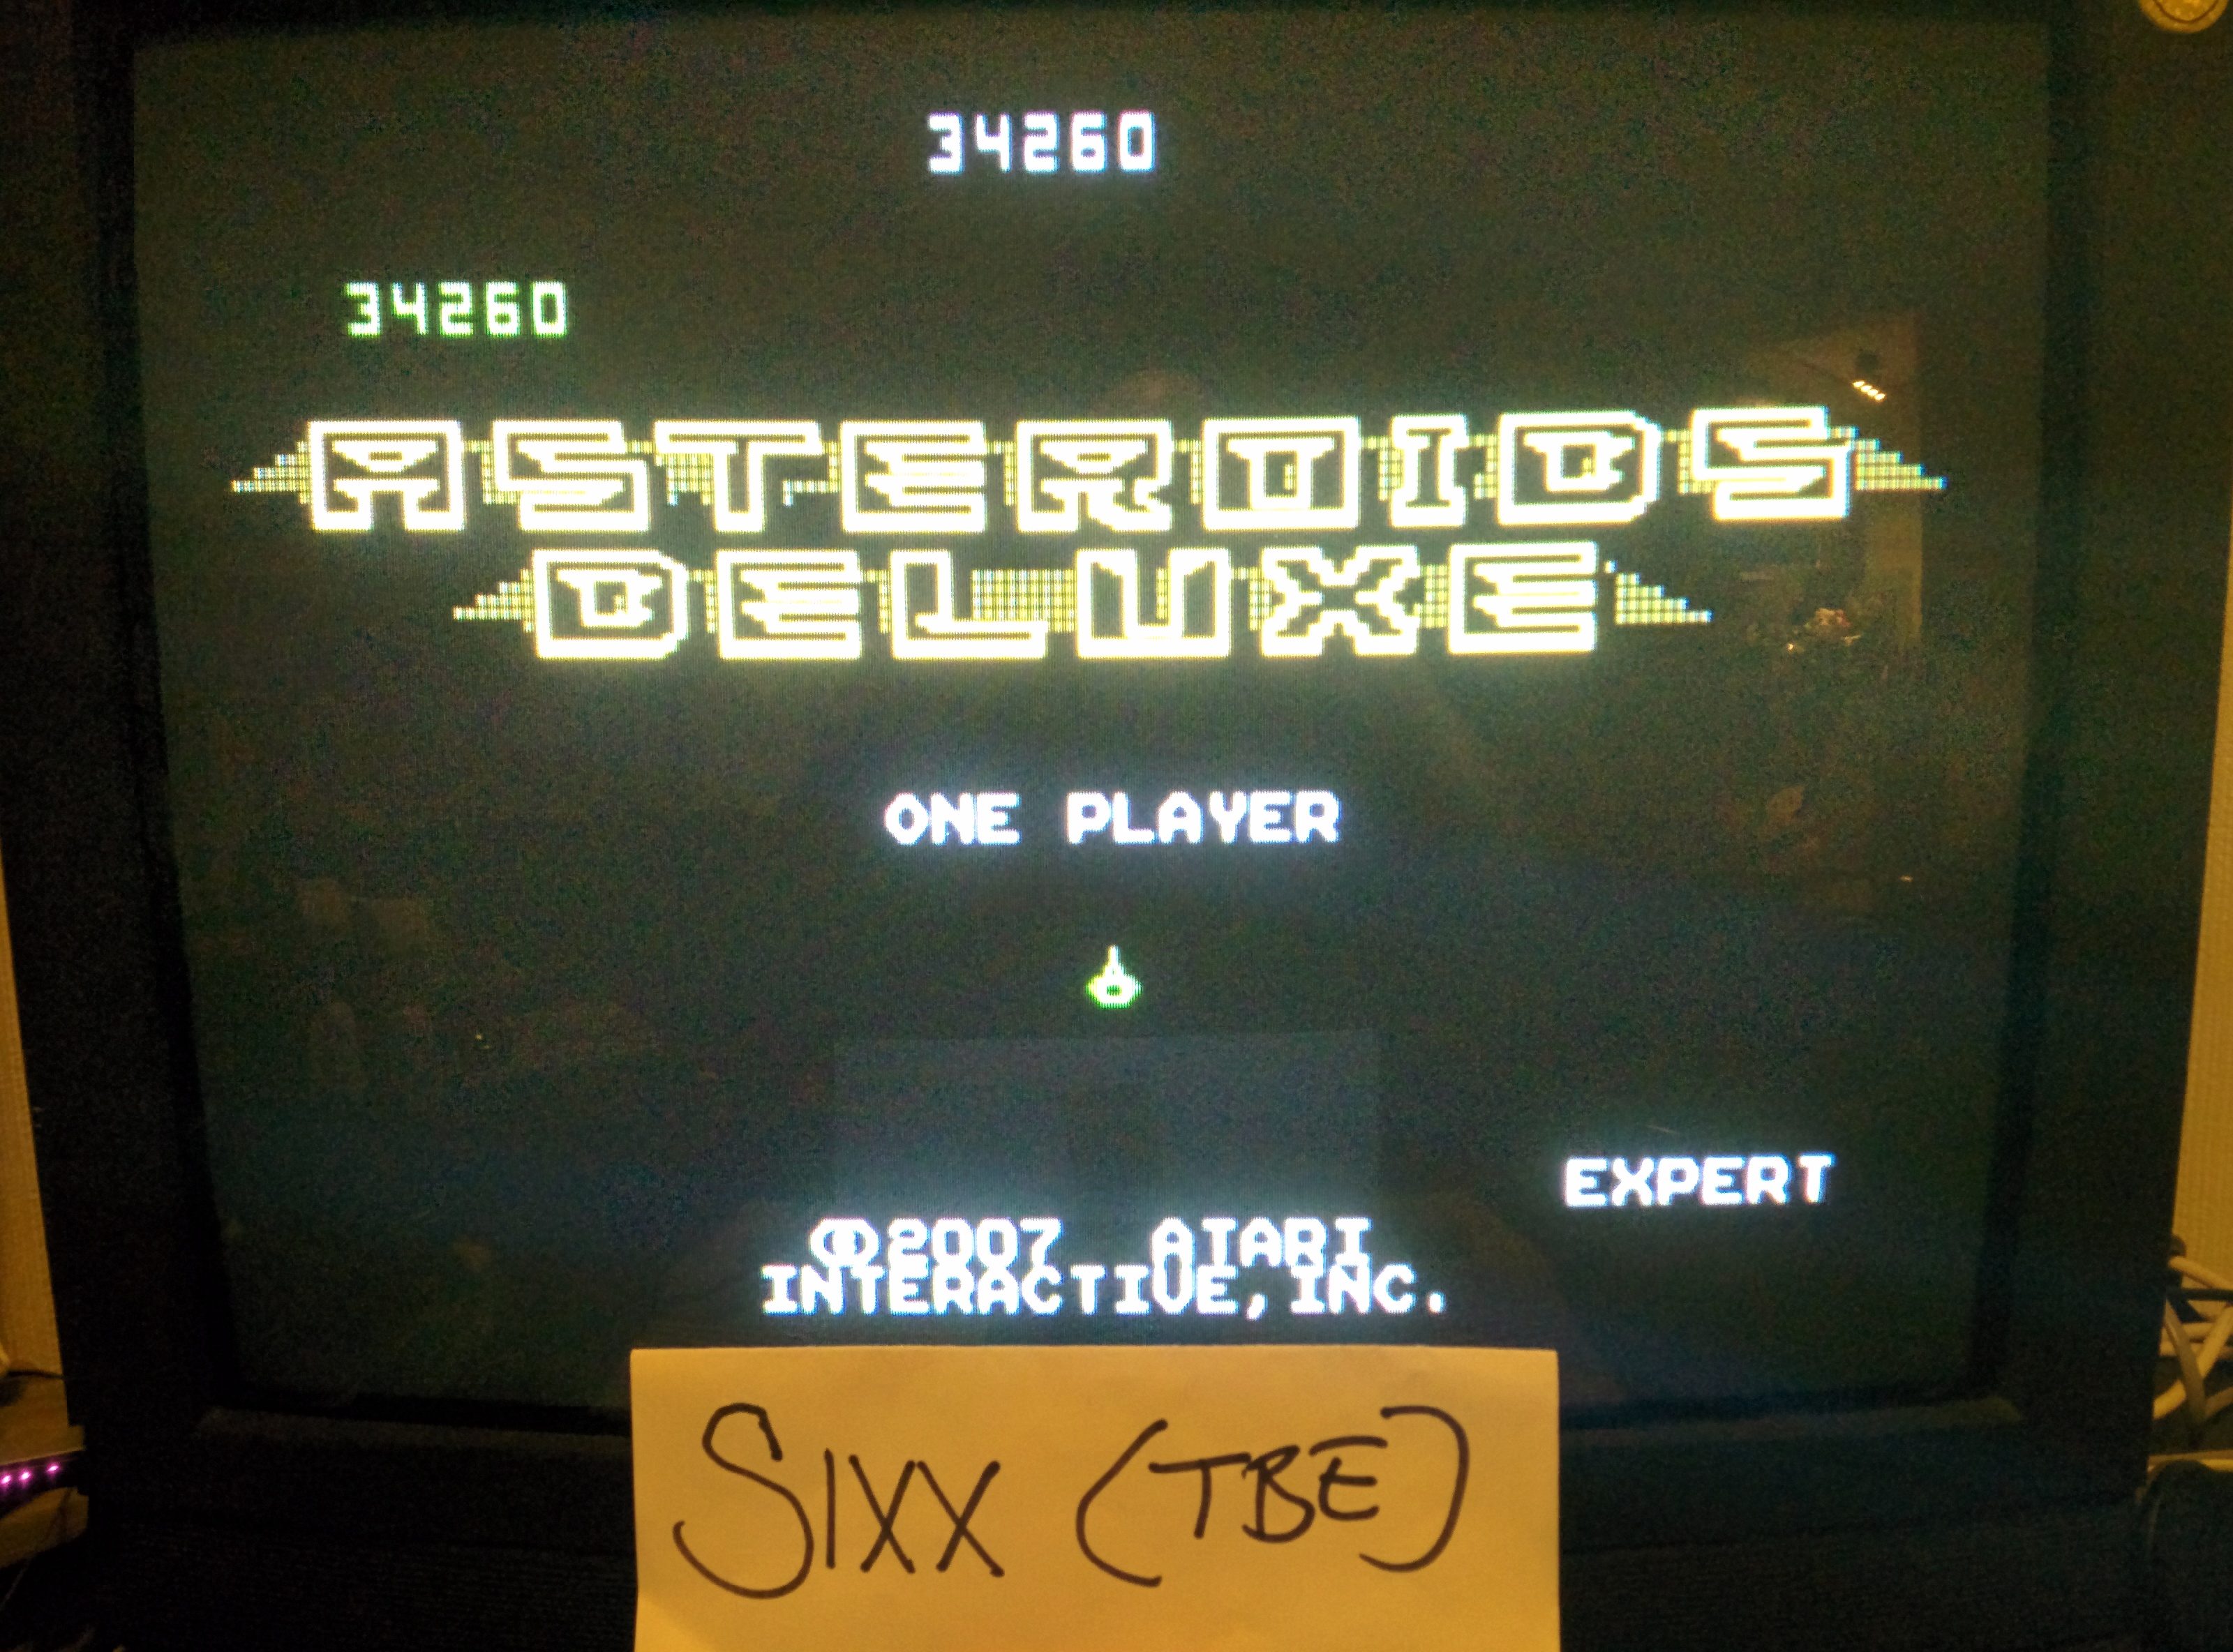 Sixx: Asteroids Deluxe: Expert (Atari 7800 Emulated) 34,260 points on 2014-07-27 14:31:30